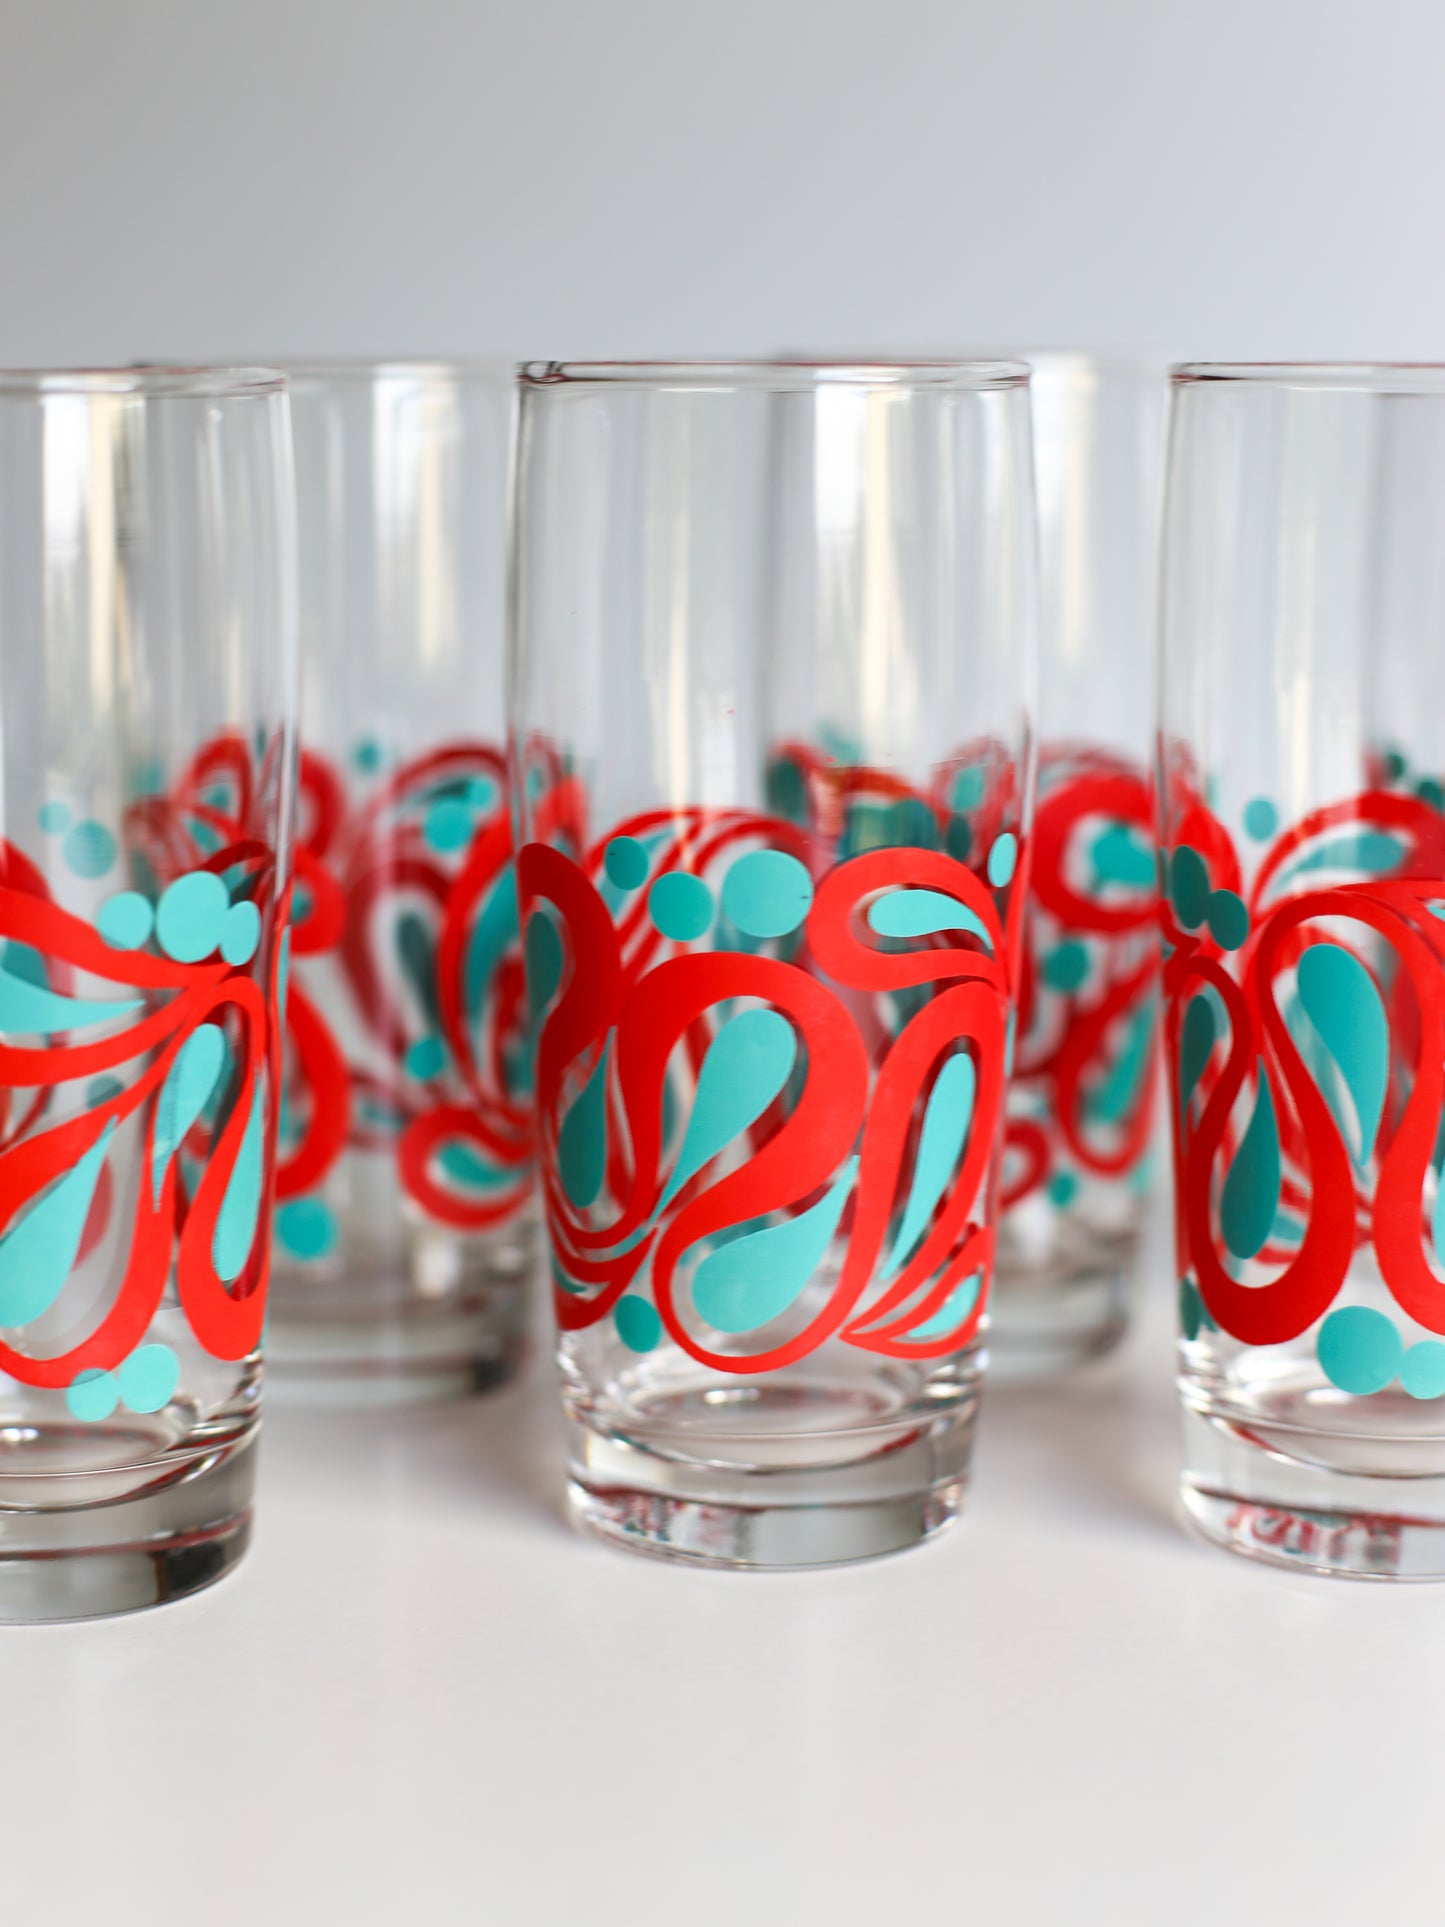 A set of 6 retro drinking glasses